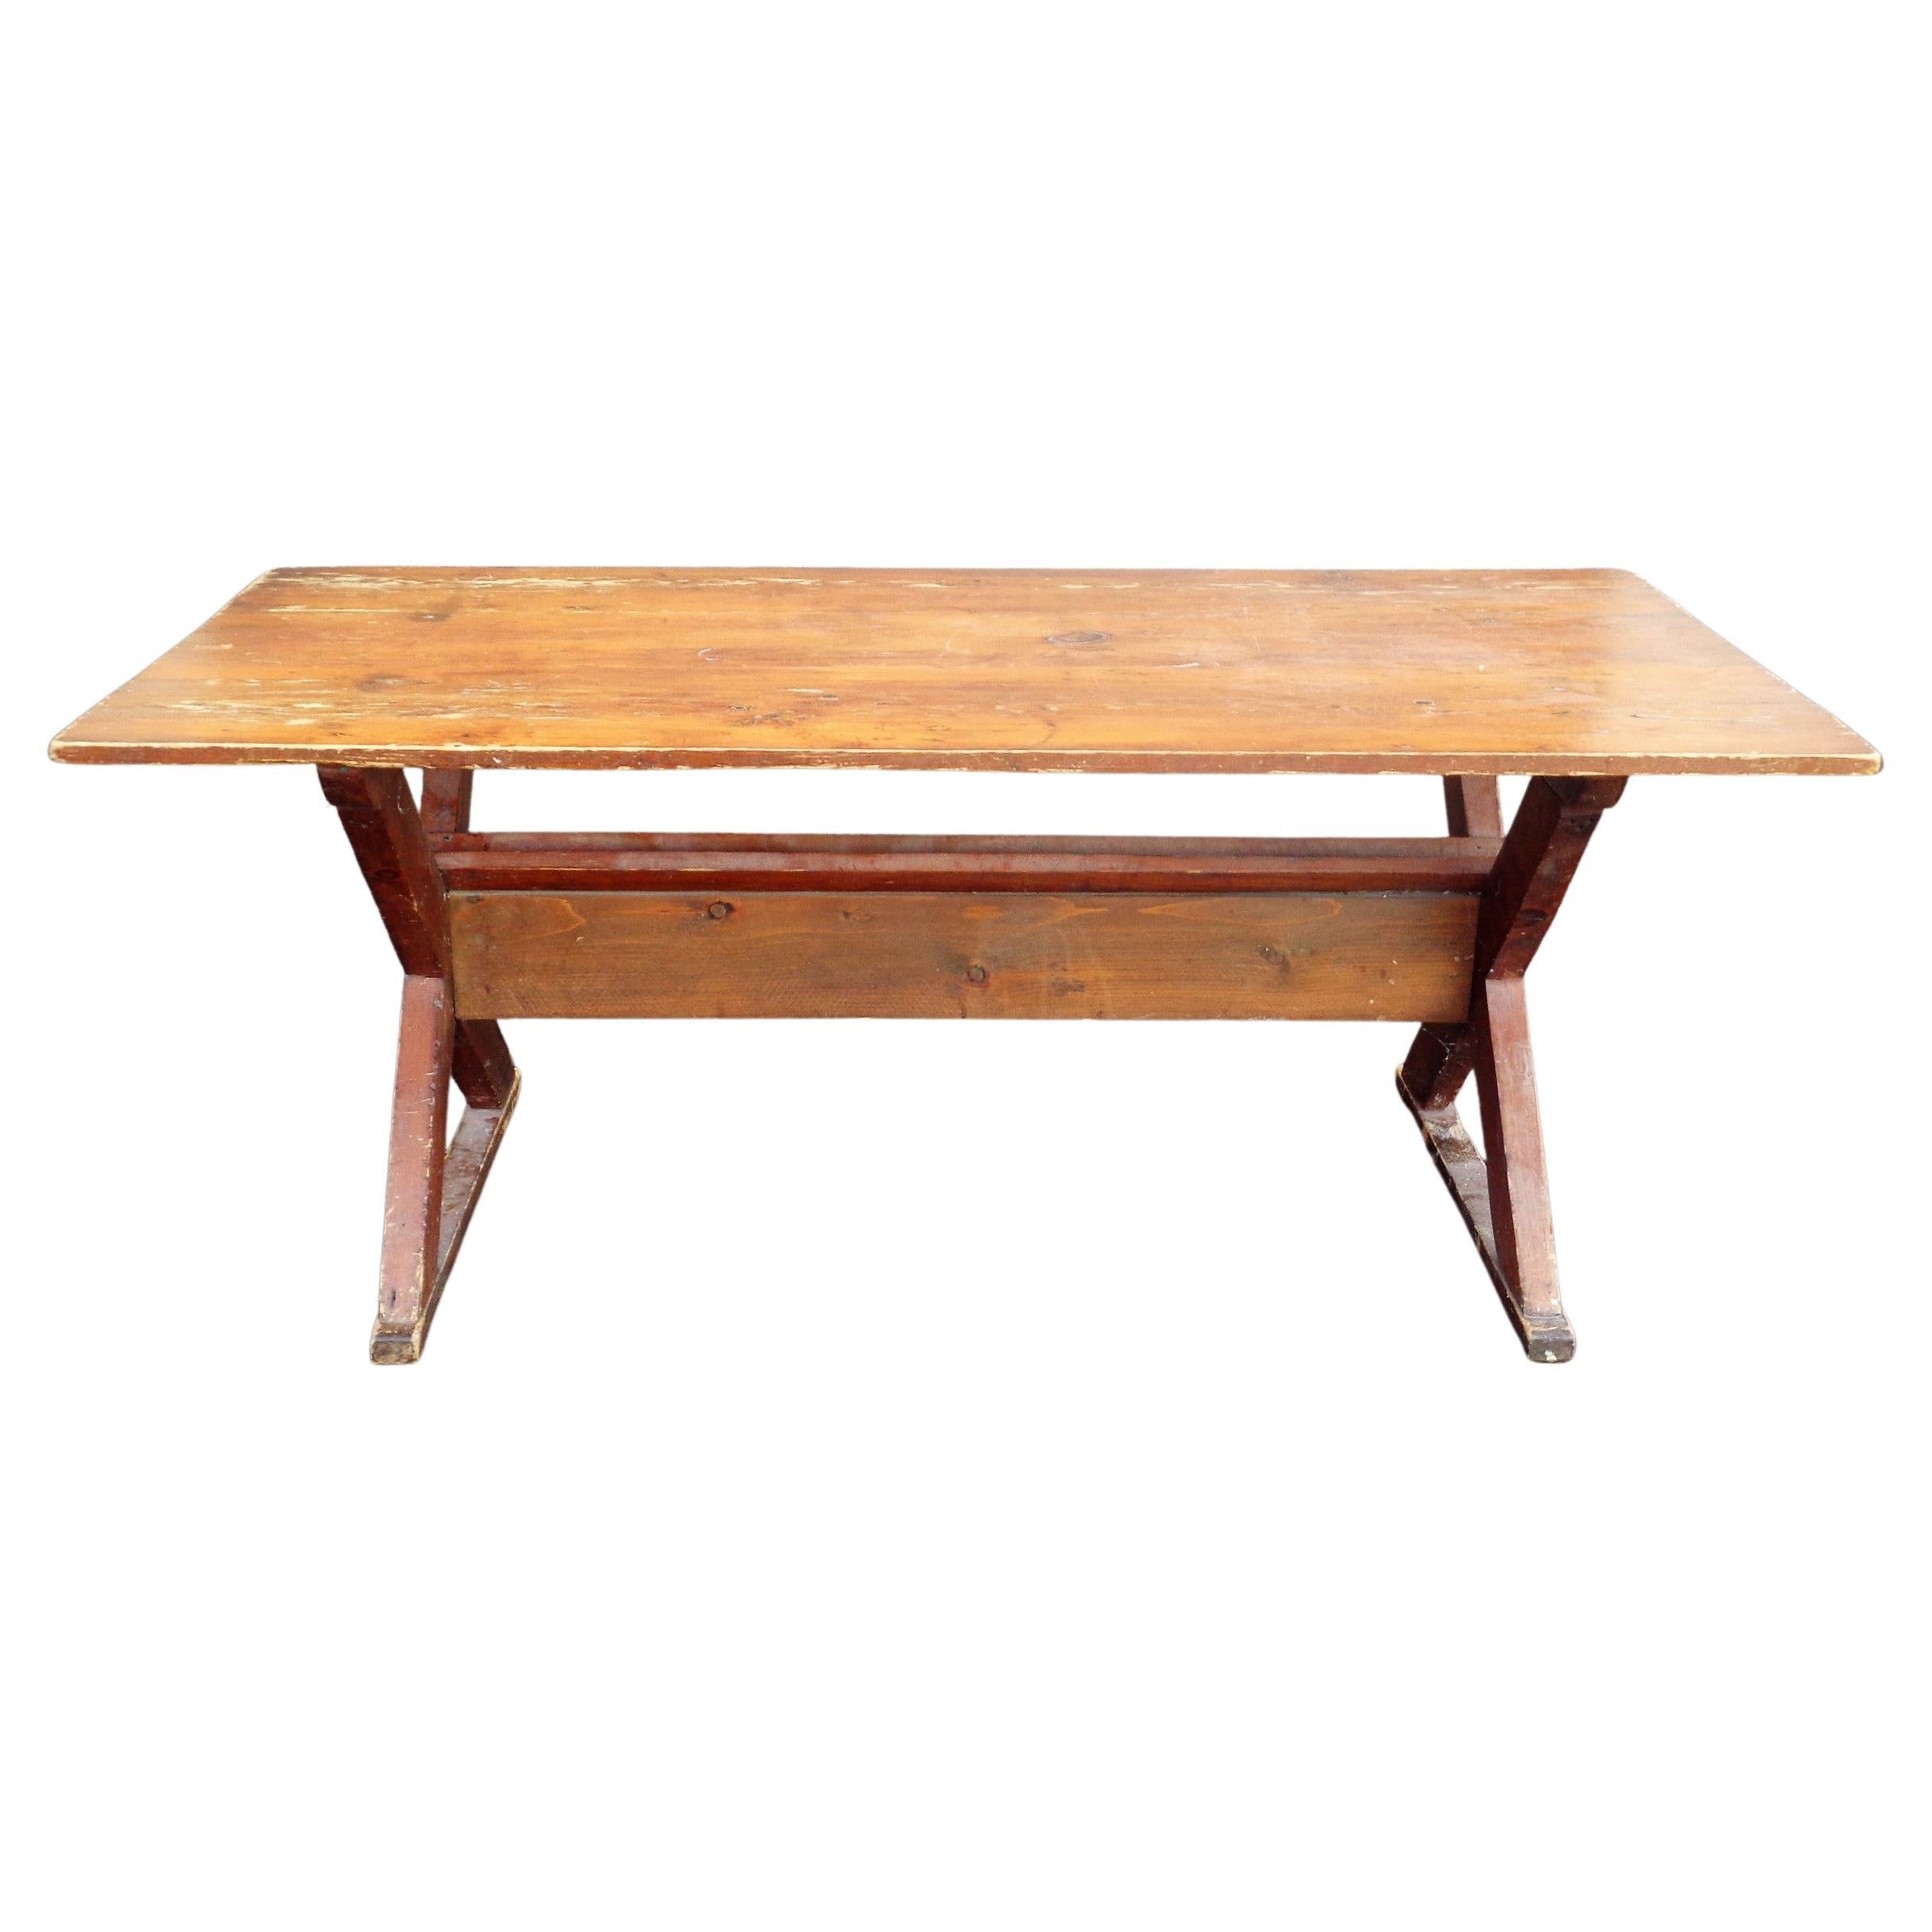 American country pine sawbuck trestle table with one inch thick wide three board top in overall nicely aged original old surface color patina. Circa 1940. Measures 68 1/2